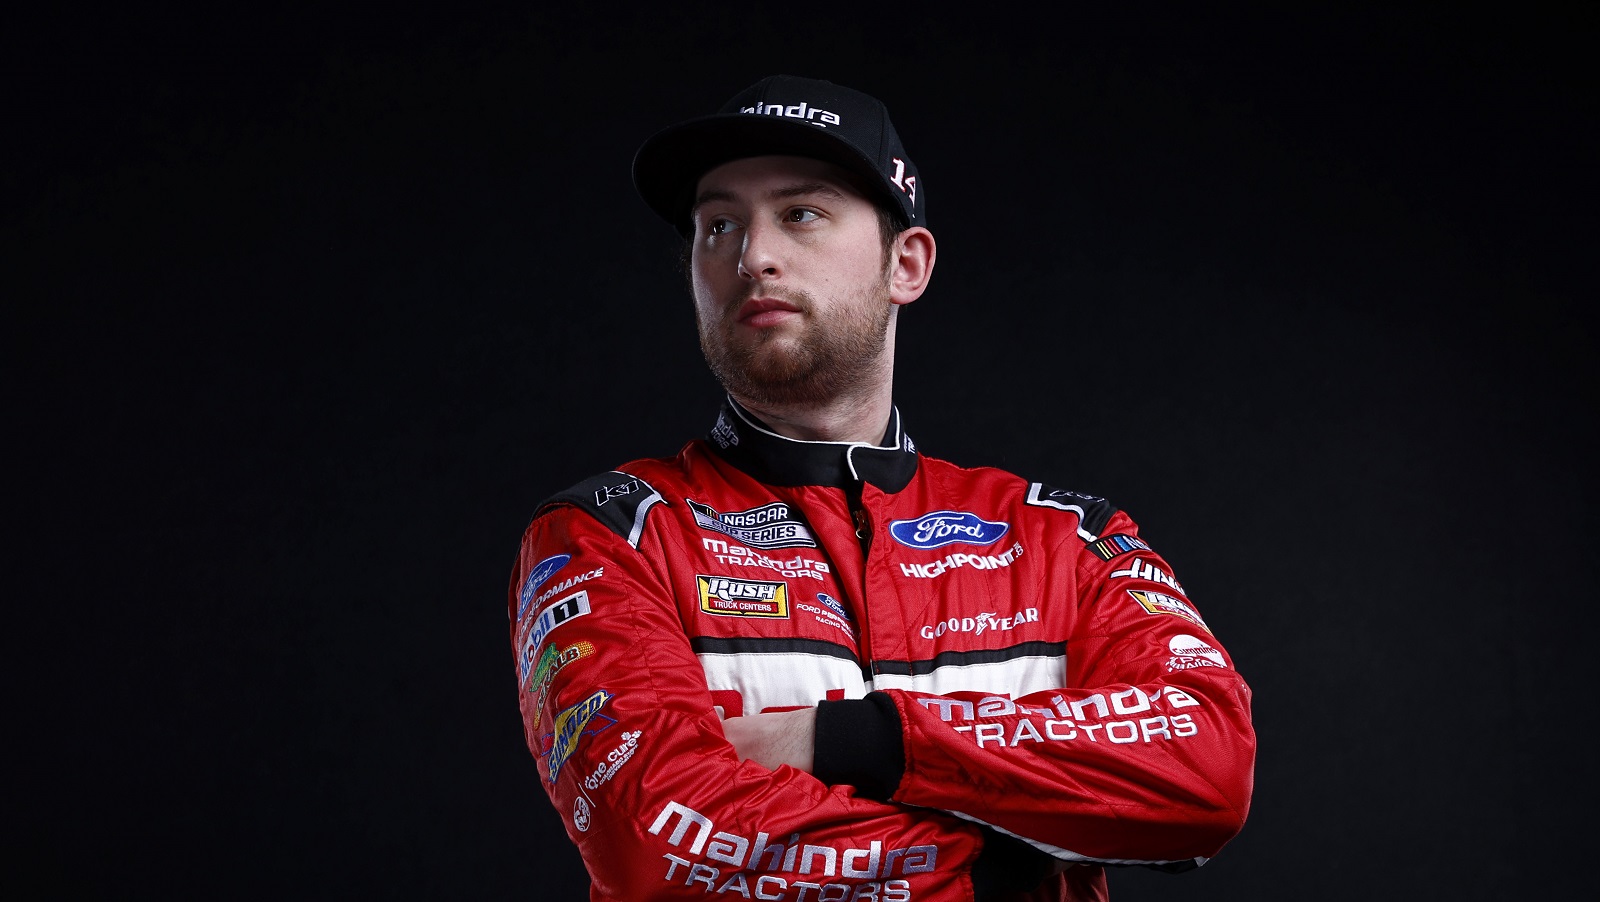 Chase Briscoe of Stewart-Haas Racing in the Cup Series poses for a photo during NASCAR Production Days on Jan. 19, 2022. | by Jared C. Tilton/Getty Images